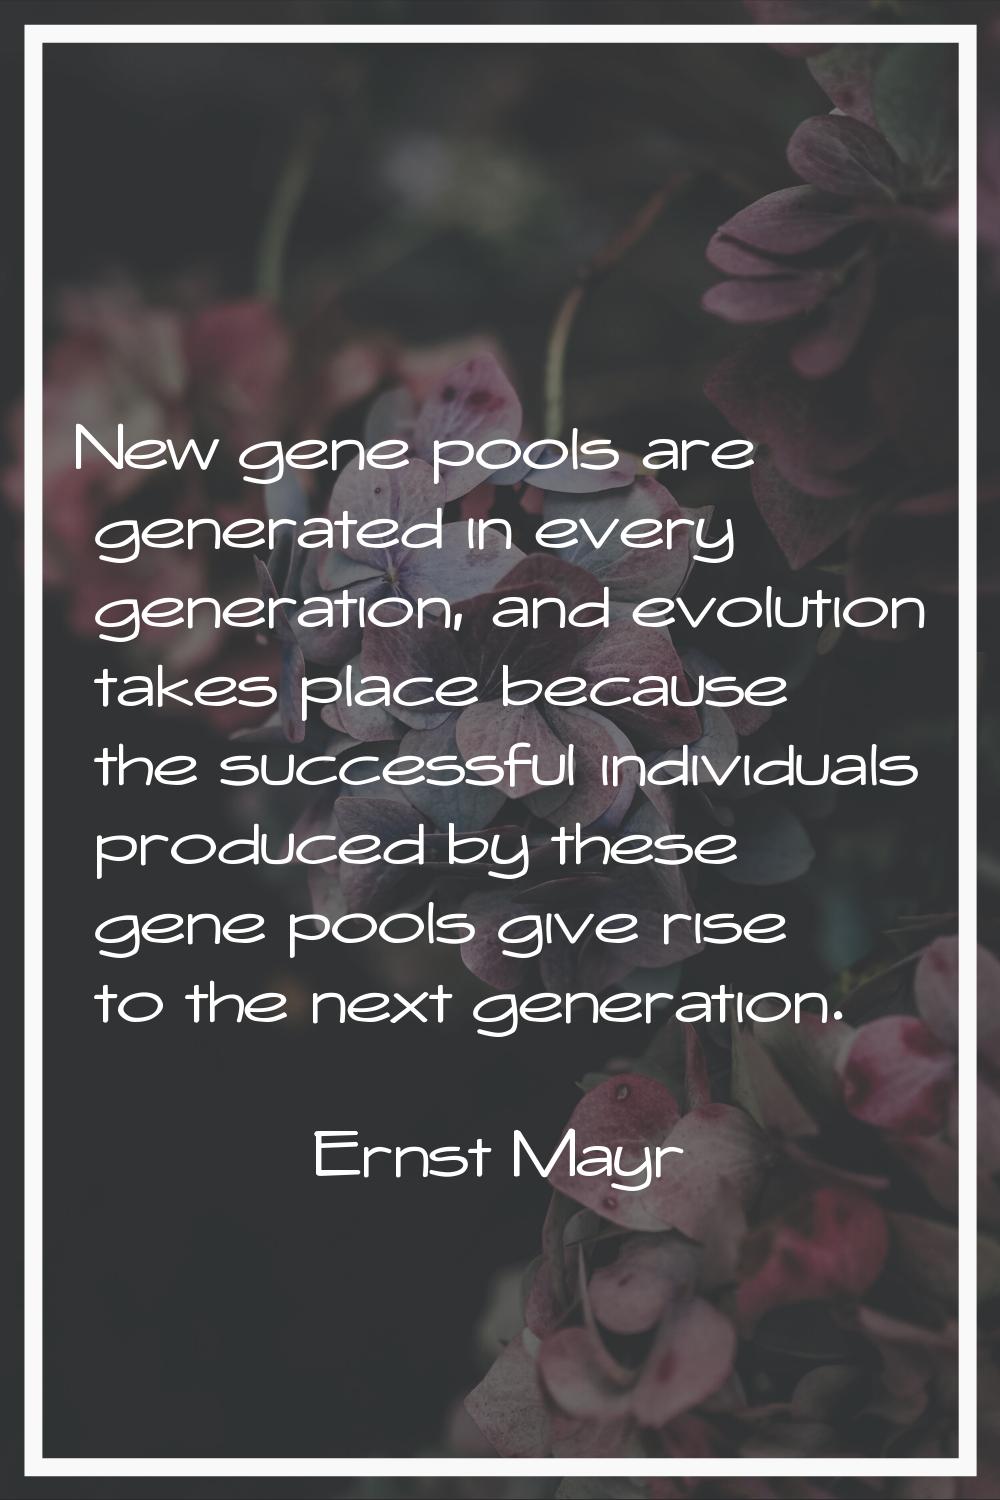 New gene pools are generated in every generation, and evolution takes place because the successful 